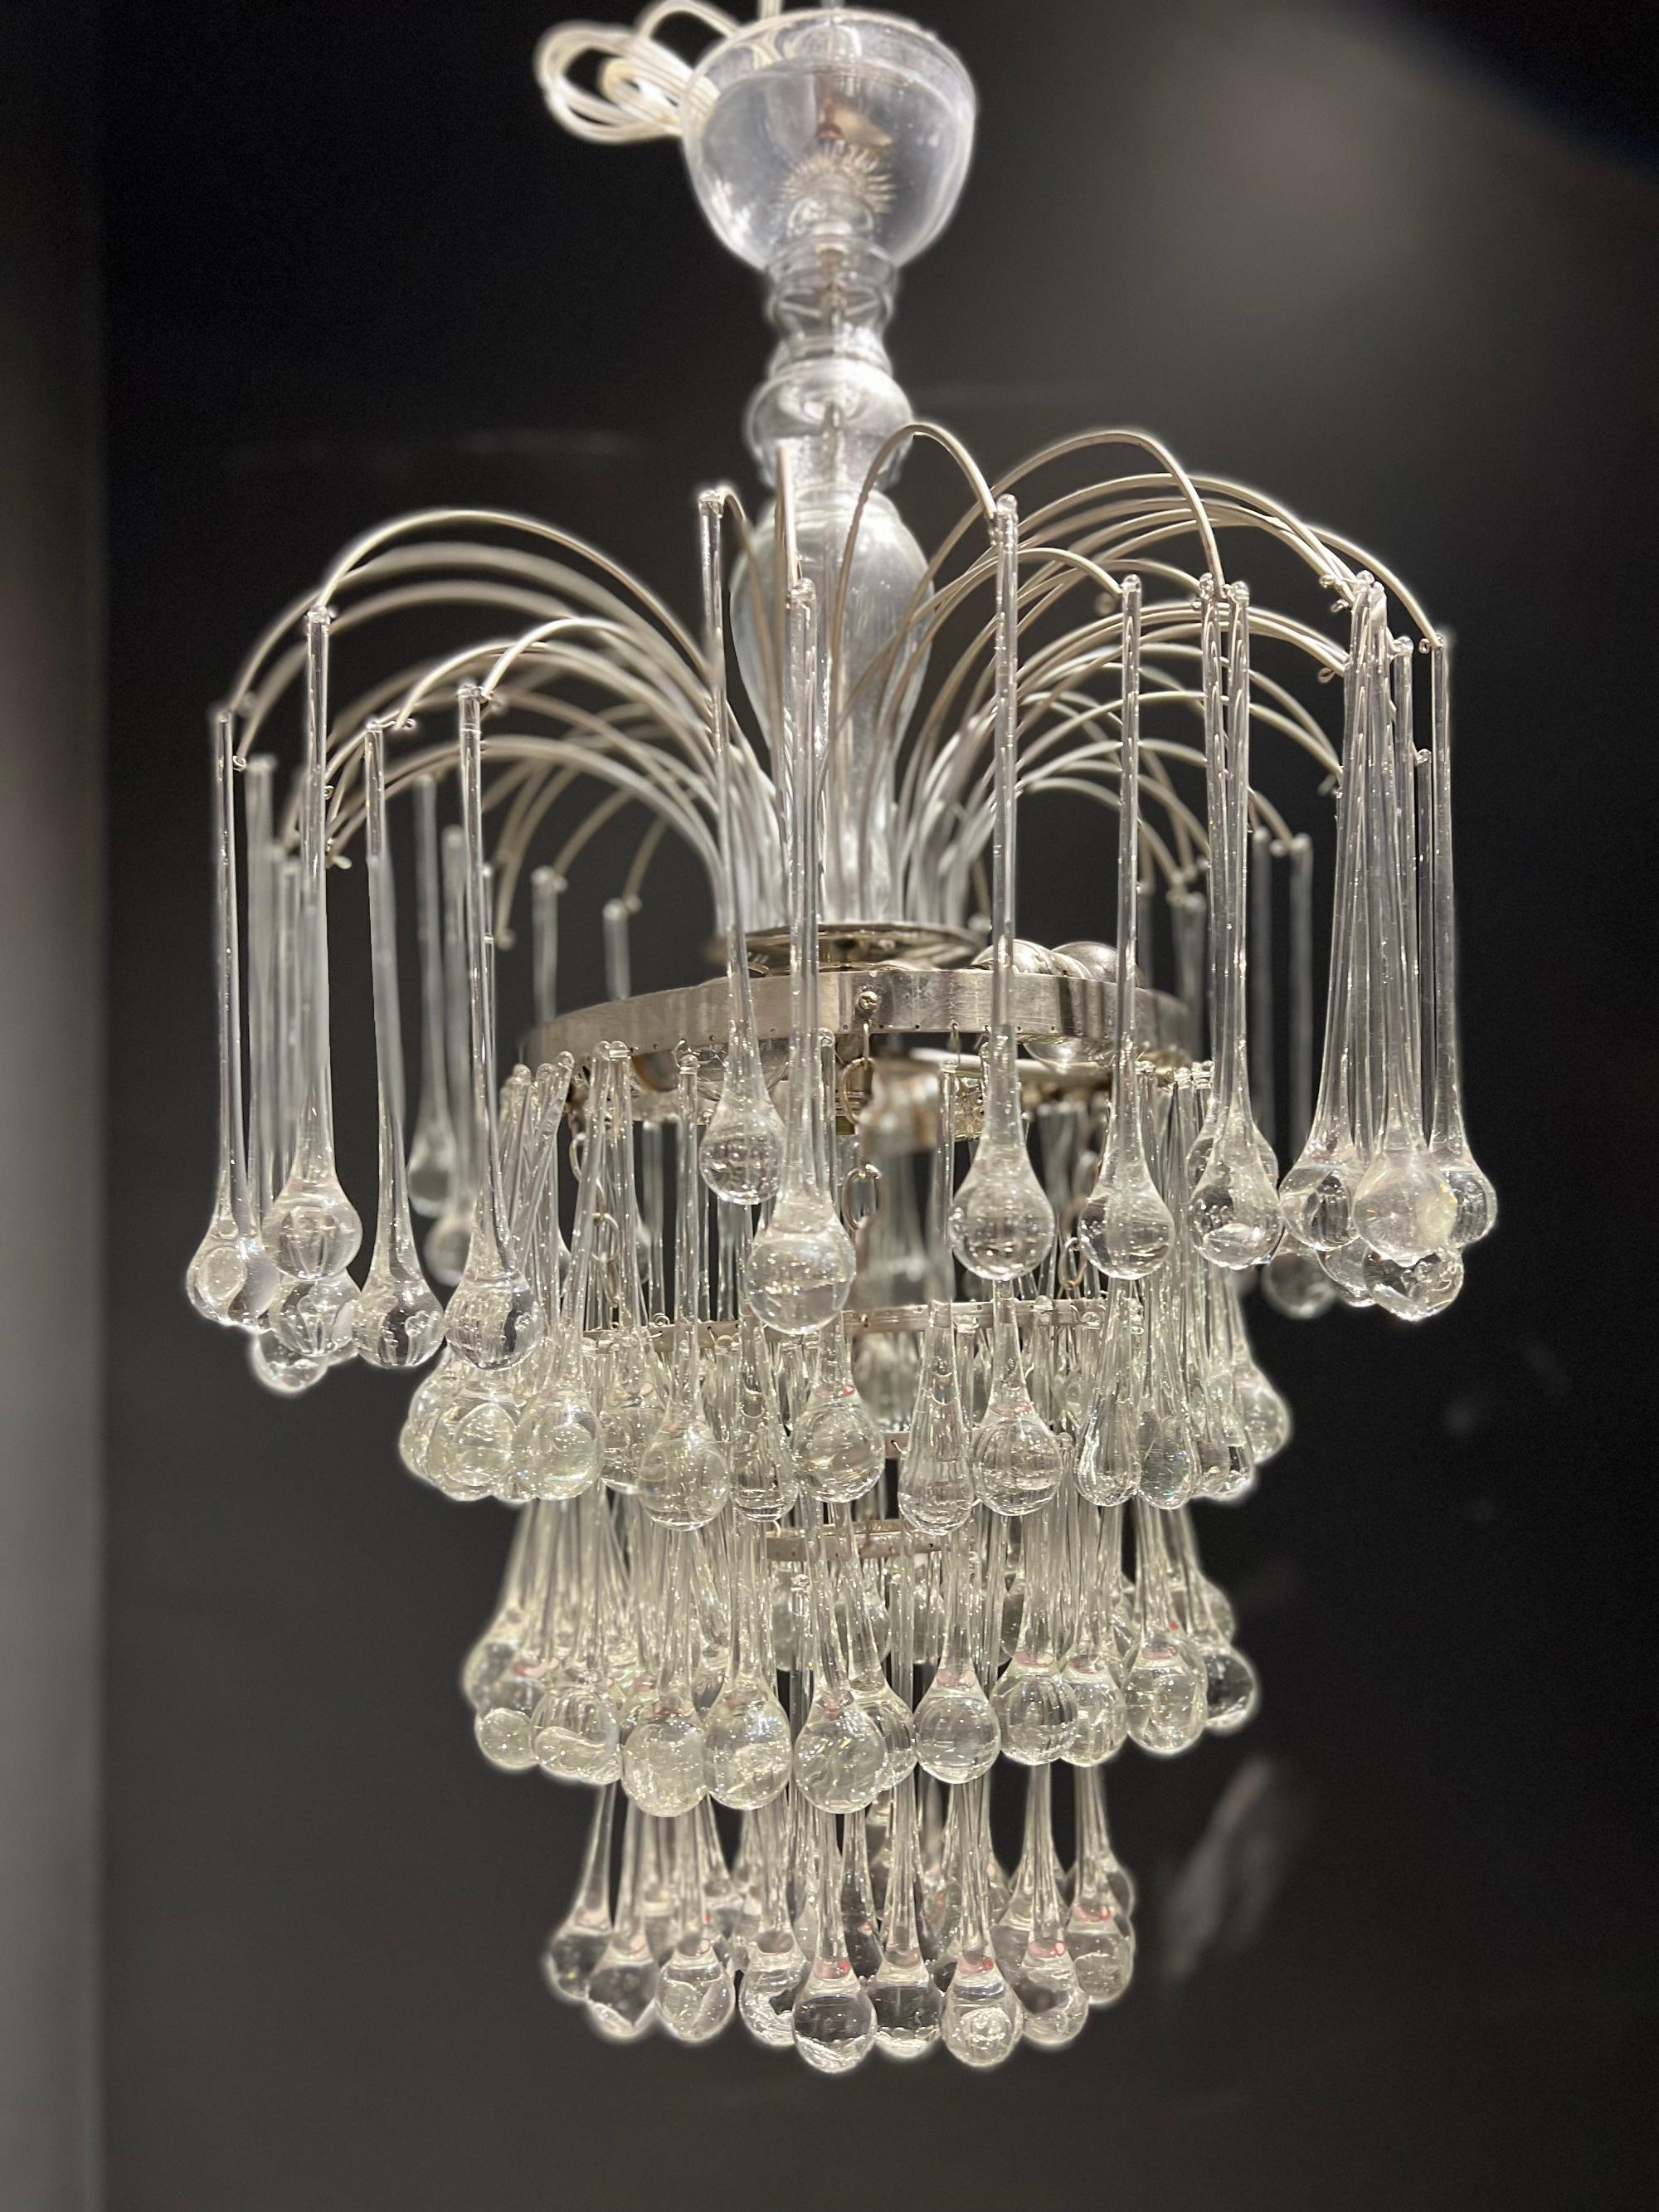 French Provincial 1940’s French Glass Drop Crystals Chandelier For Sale